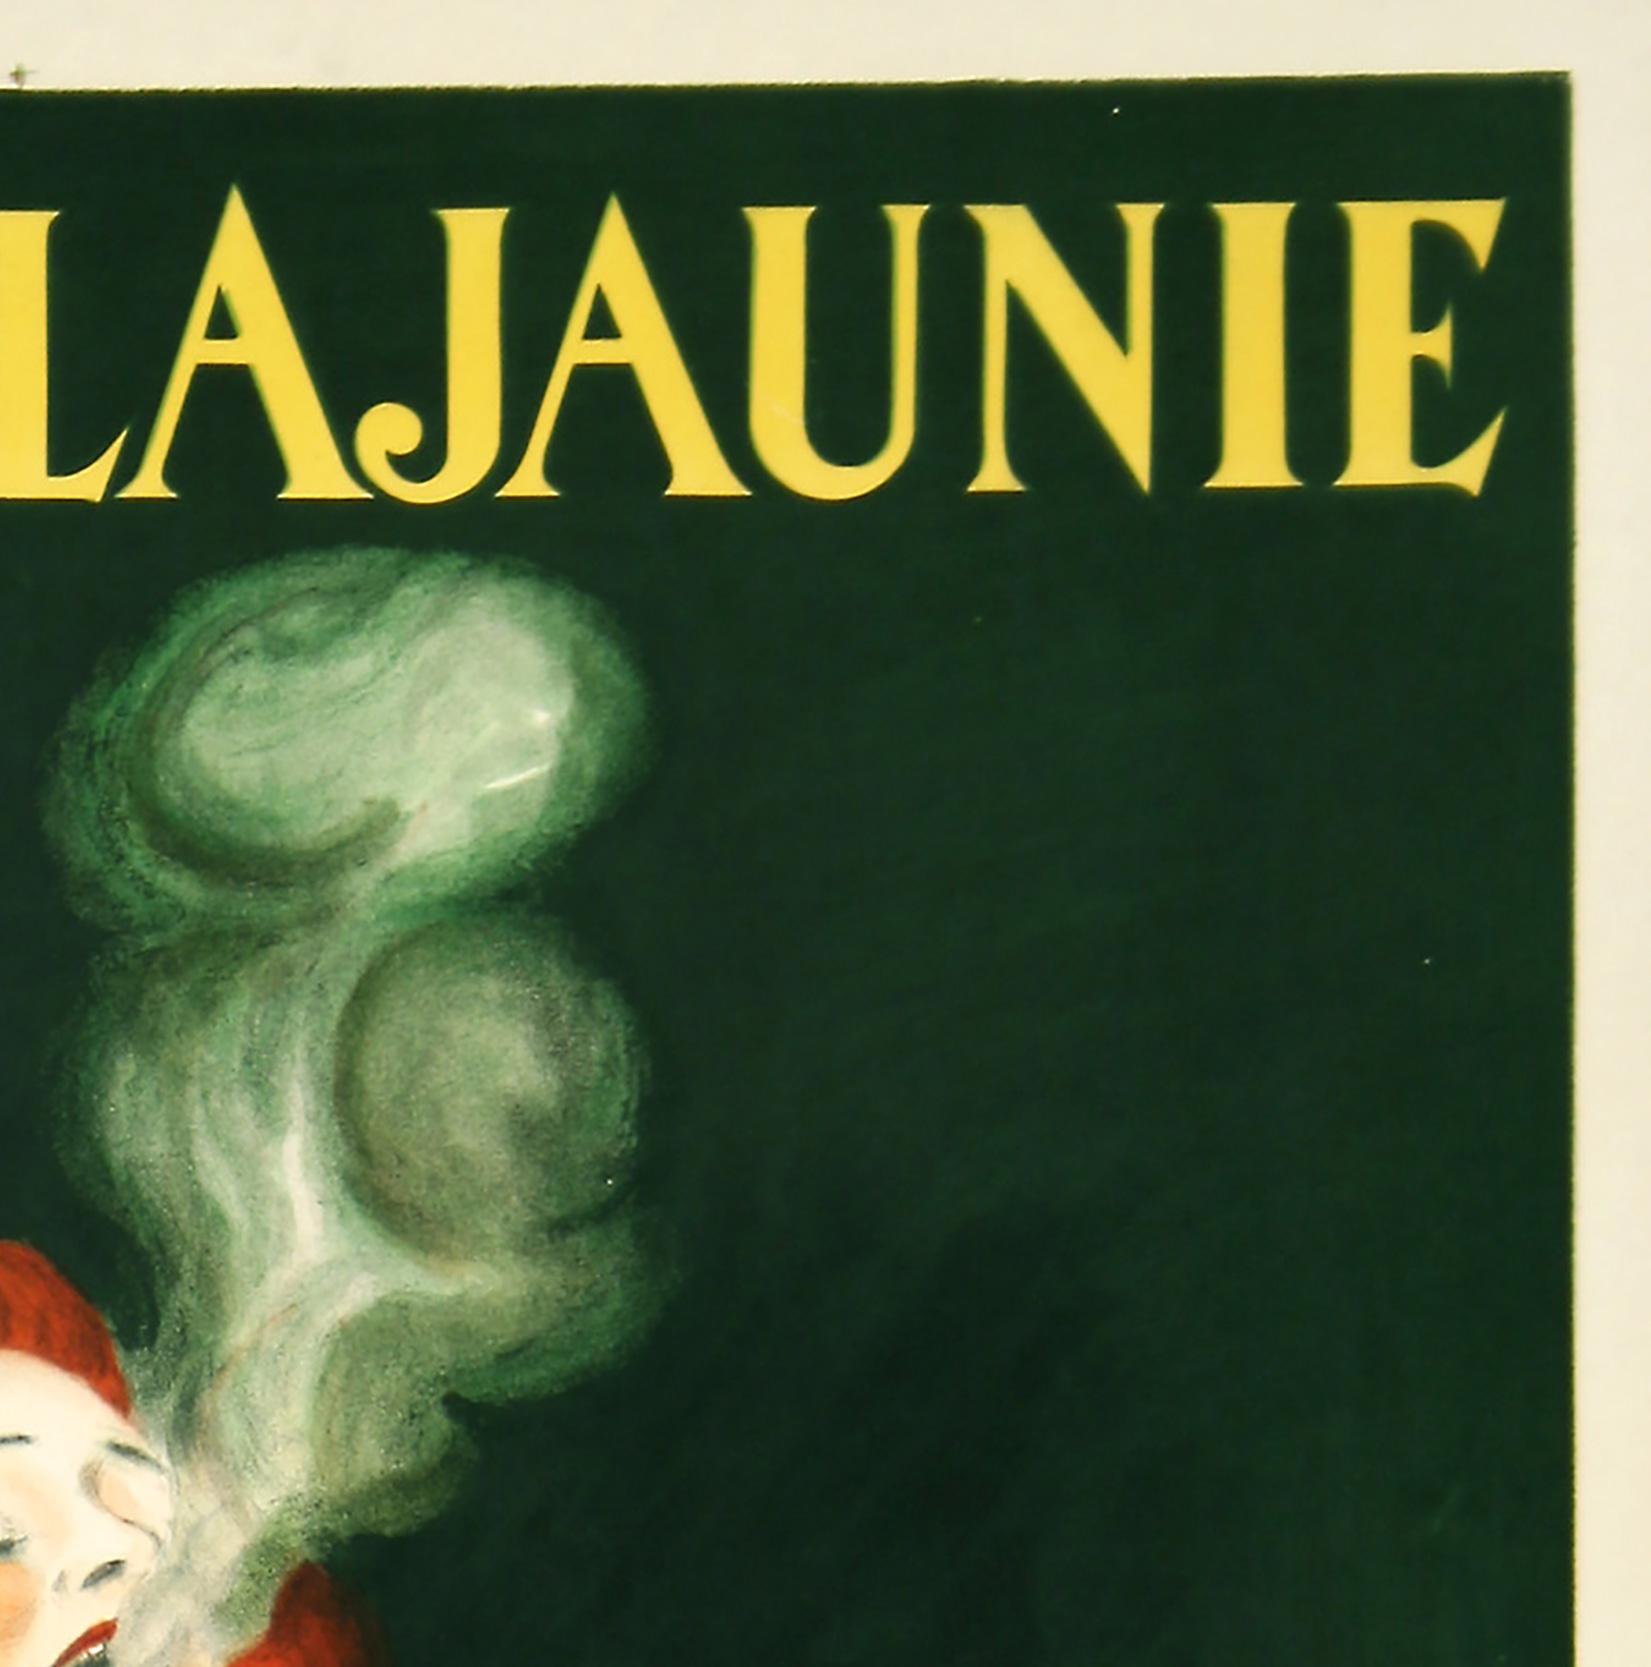 20th Century Cachou Lajaunie 1922 Vintage French Advertising Poster, Leonetto Cappiello For Sale